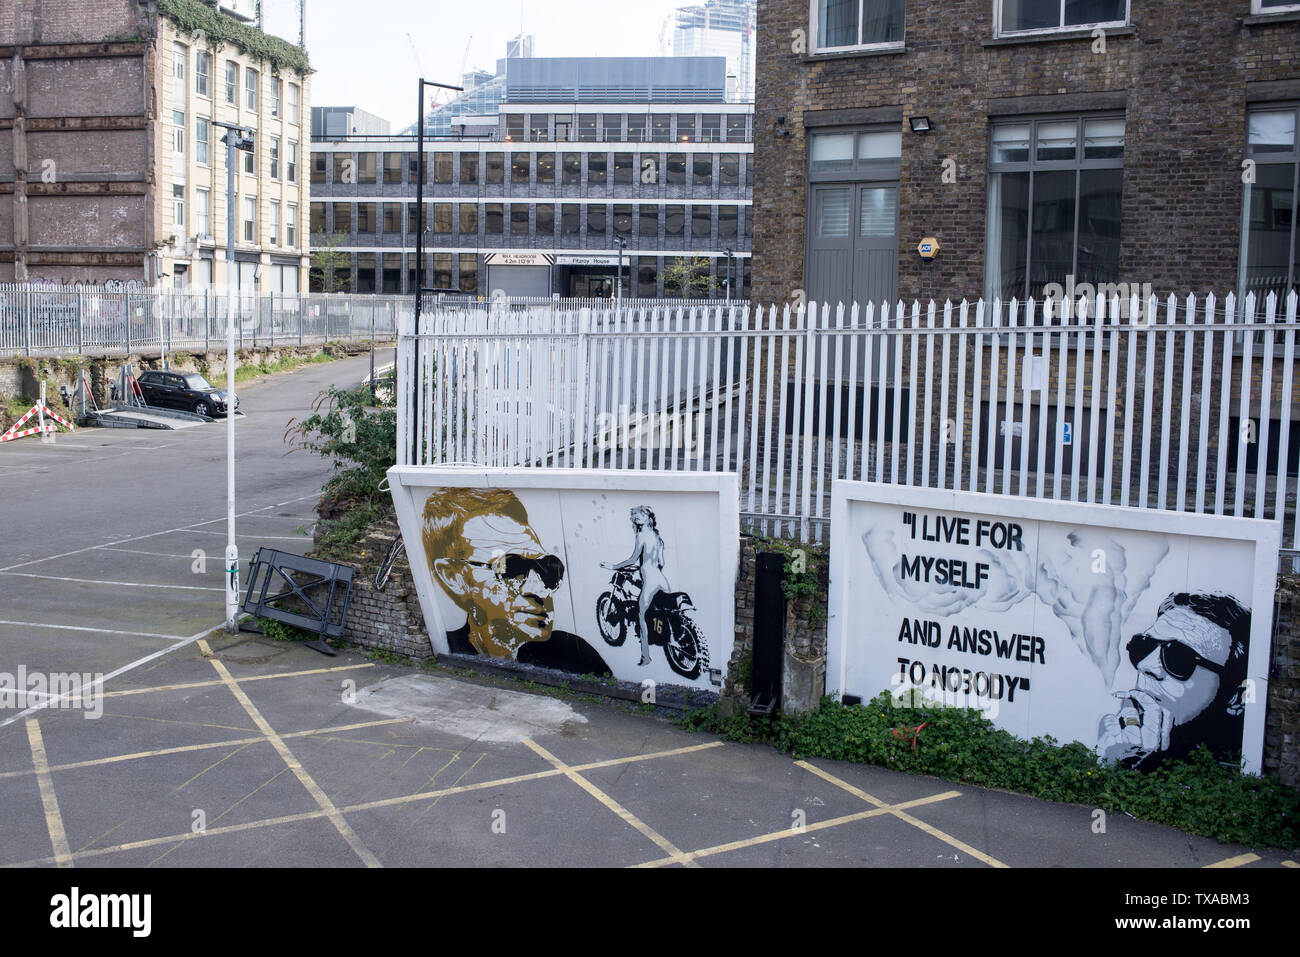 Shoreditch, London, England, UK - April 2019: Big billboards mural in empty car park paying tribute to actor Steve McQueen in Shoreditch East London Stock Photo